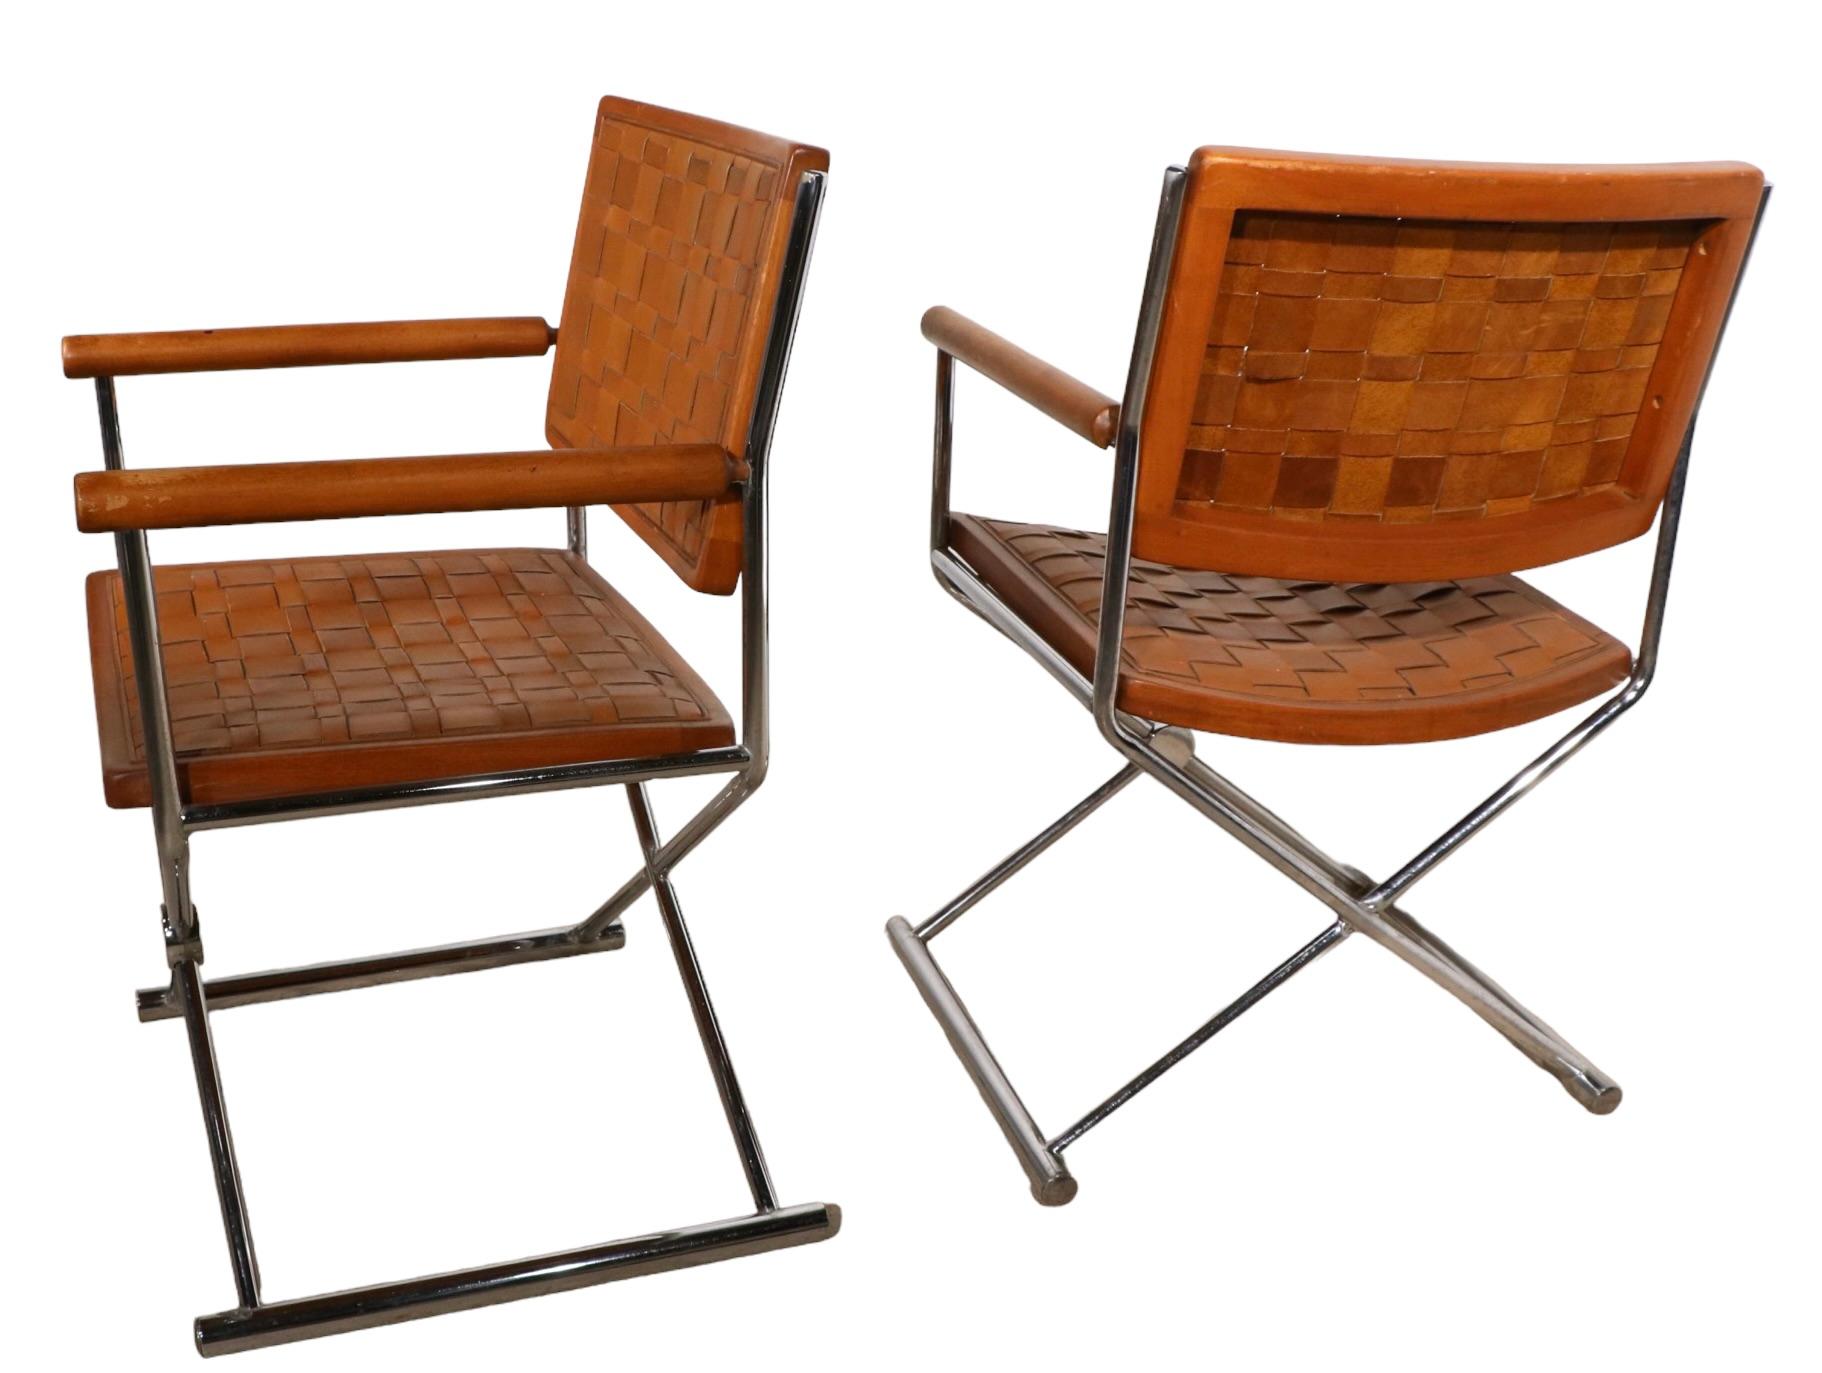 American Pr. Leather Wood and Chrome Hollywood Regency Style Directors Chairs c. 1970's